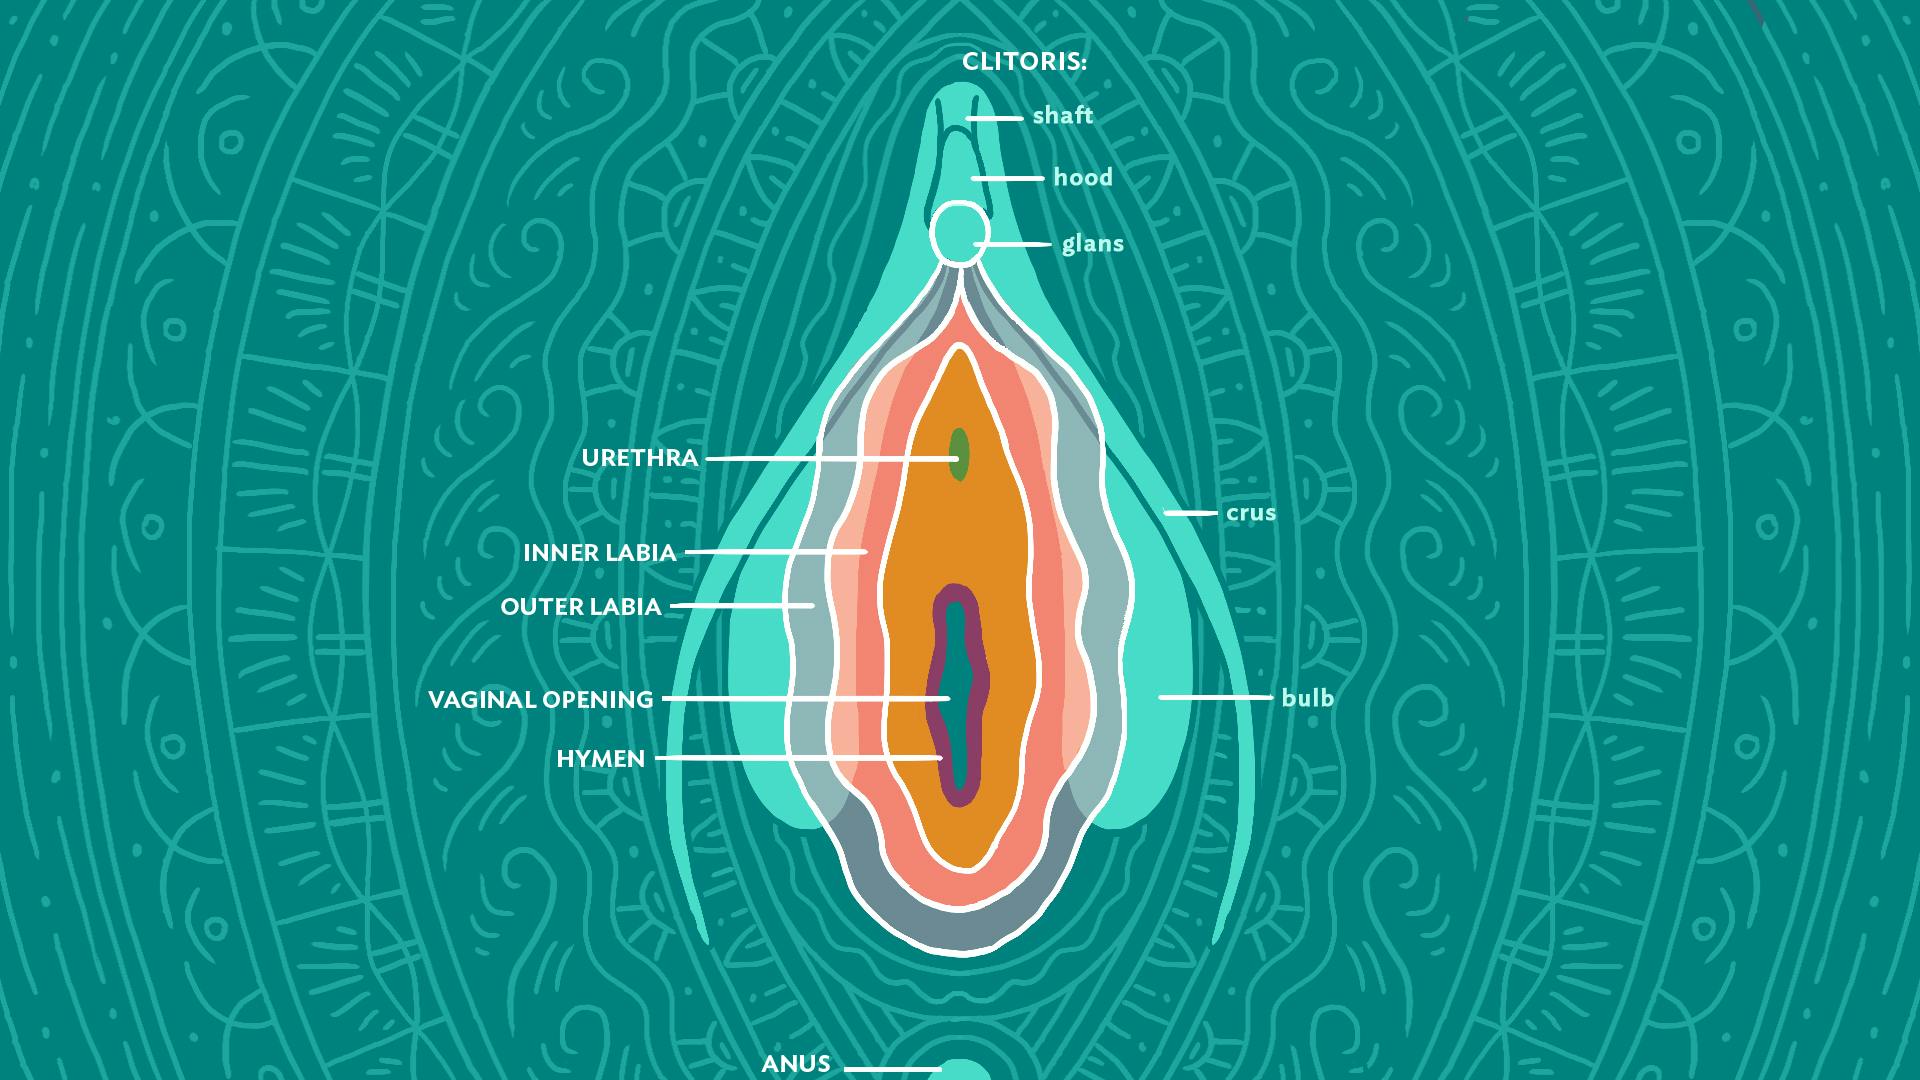 Illustration of the vulva with labeled inner and outer labia, clitoris, urethra, vaginal opening, and hymen.